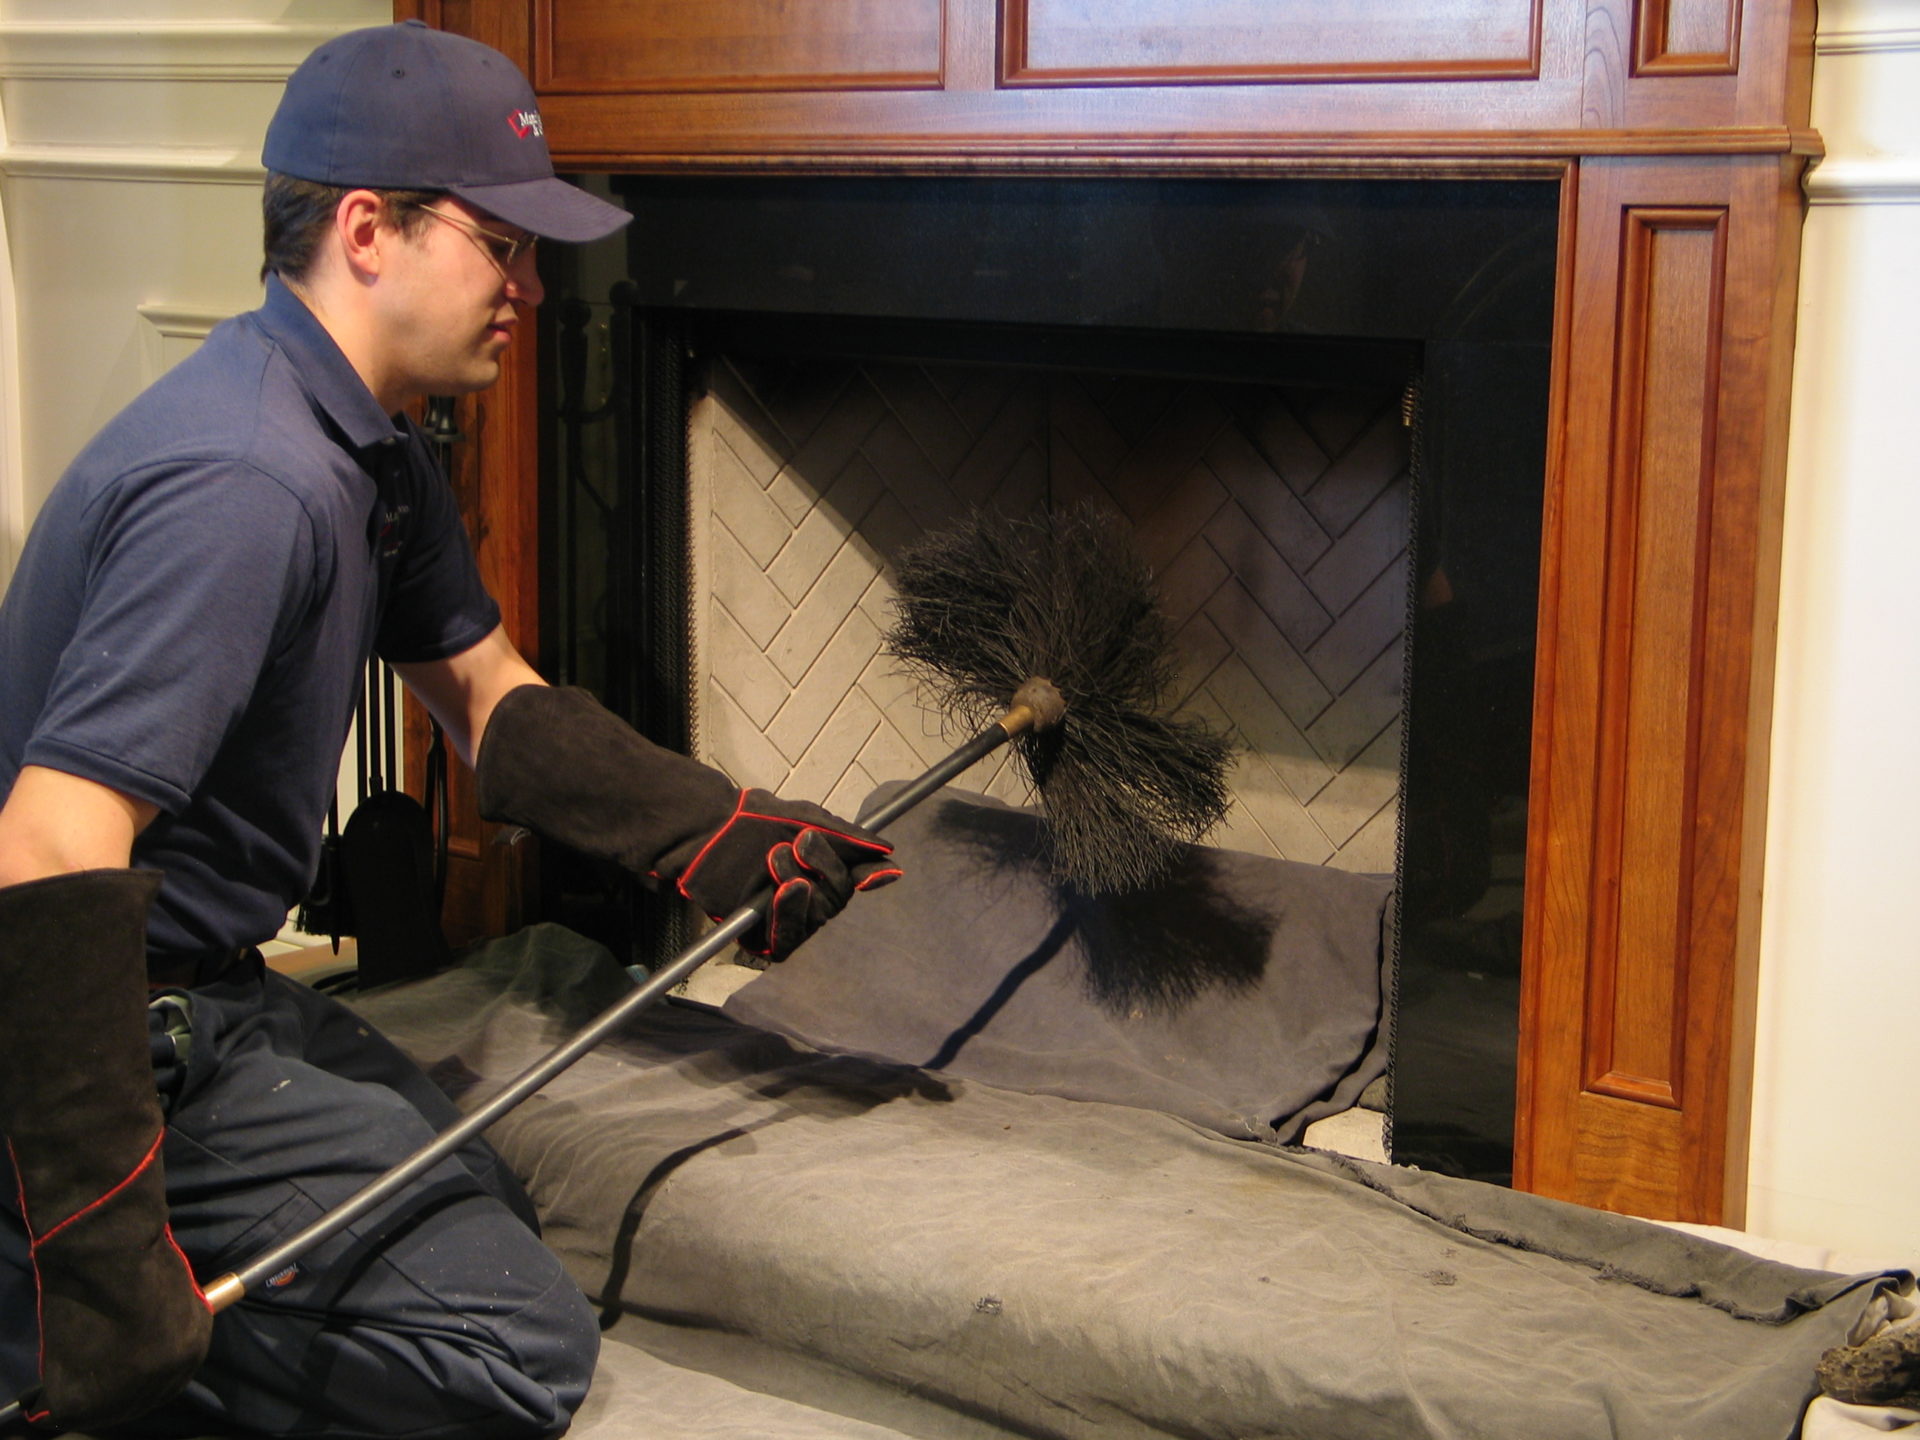 how to clean your fireplace